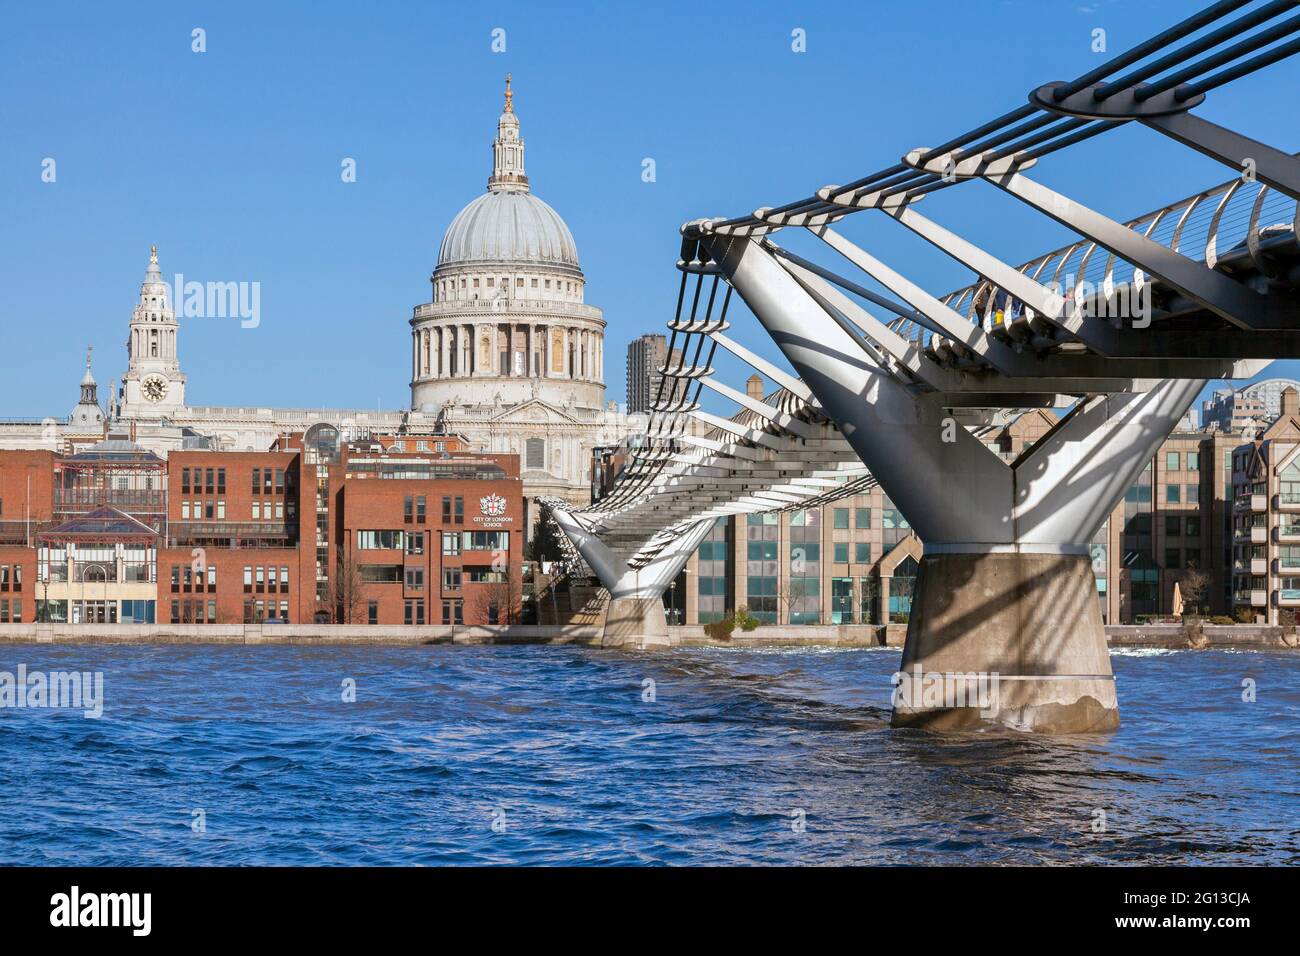 UK, England, London, Bankside, The London Millennium Footbridge with St Paul's Cathedral. Stock Photo